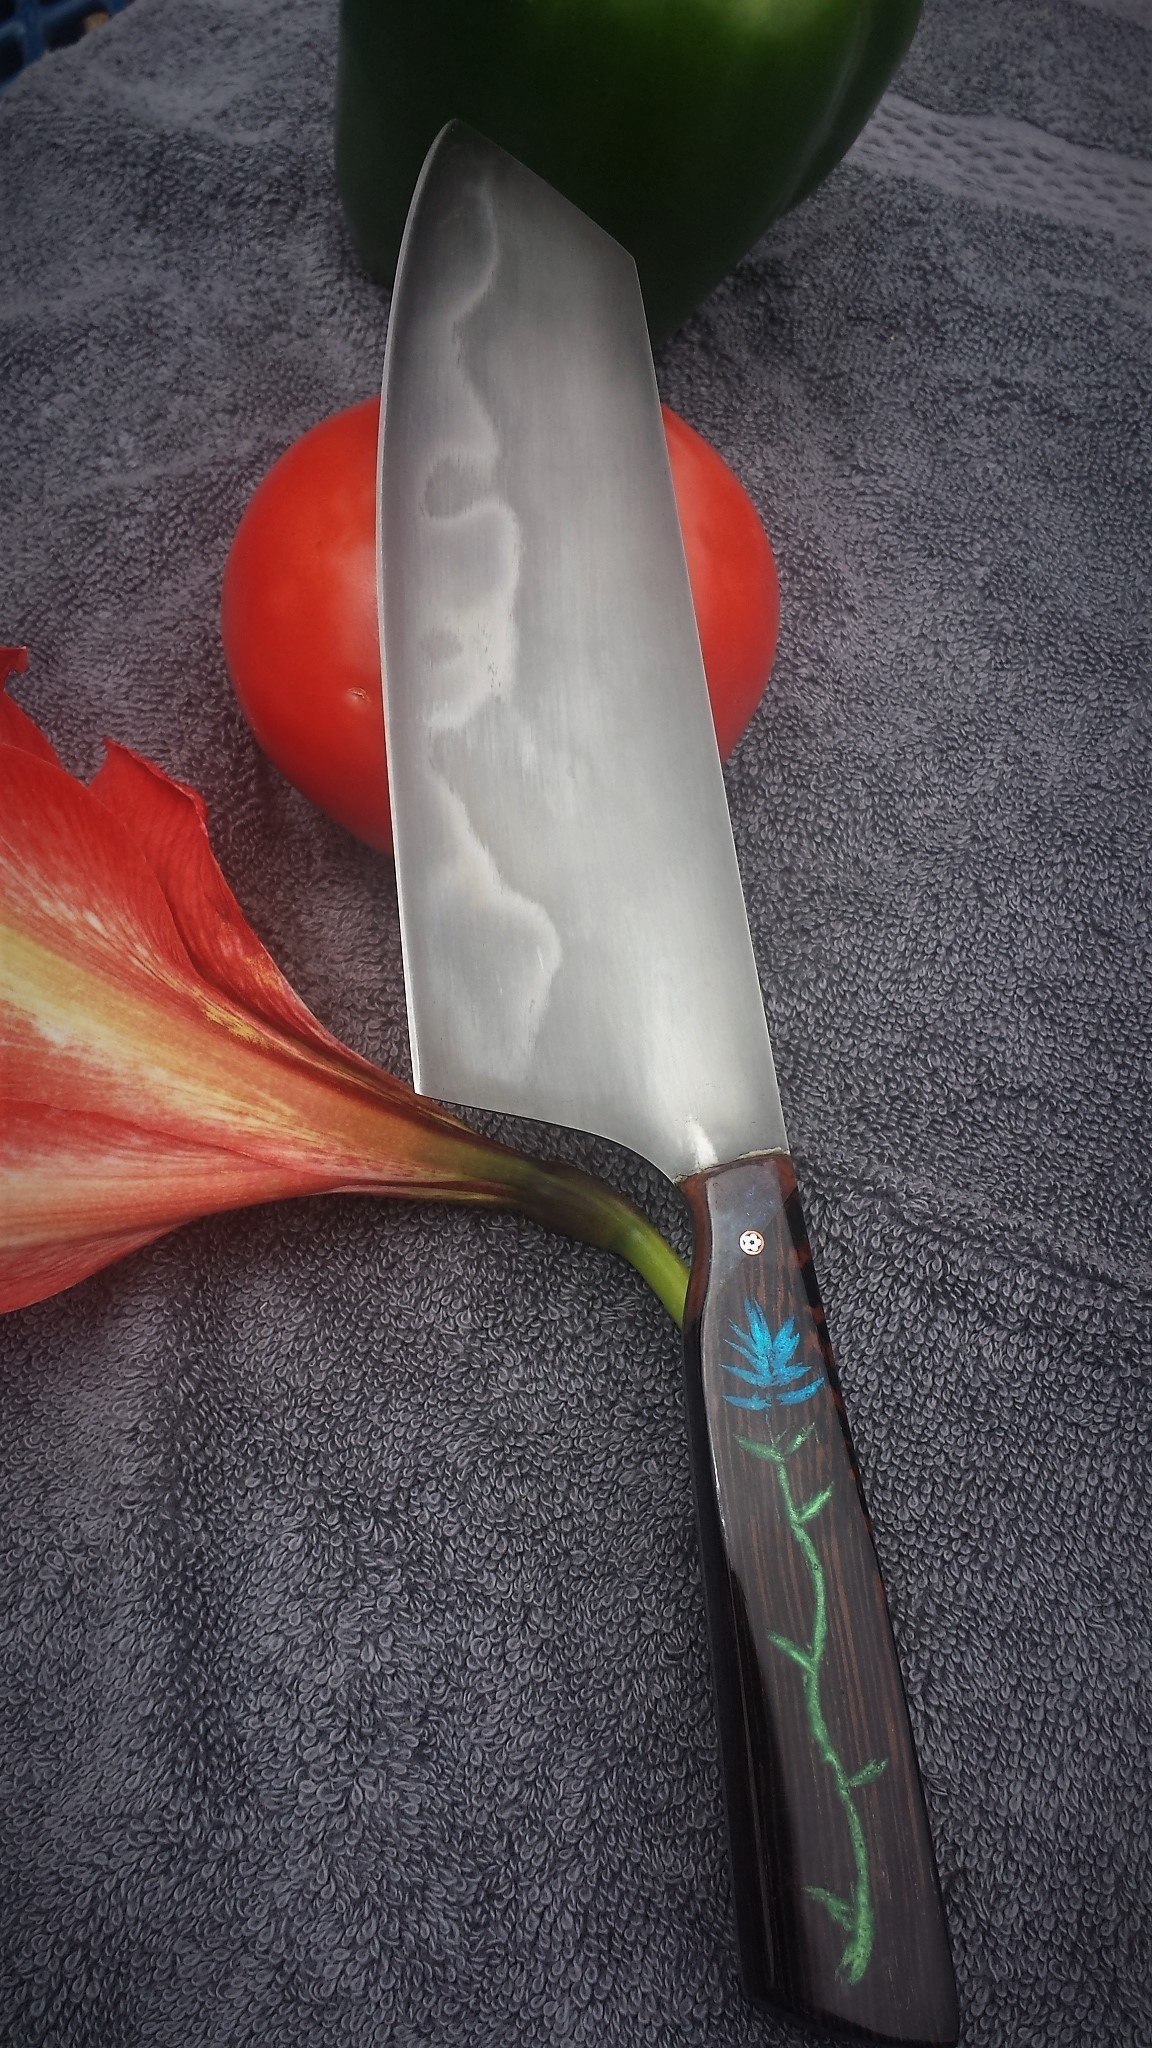 Todd Stracener made this Thai-inspired kitchen knife to be as beautiful as it is functional.